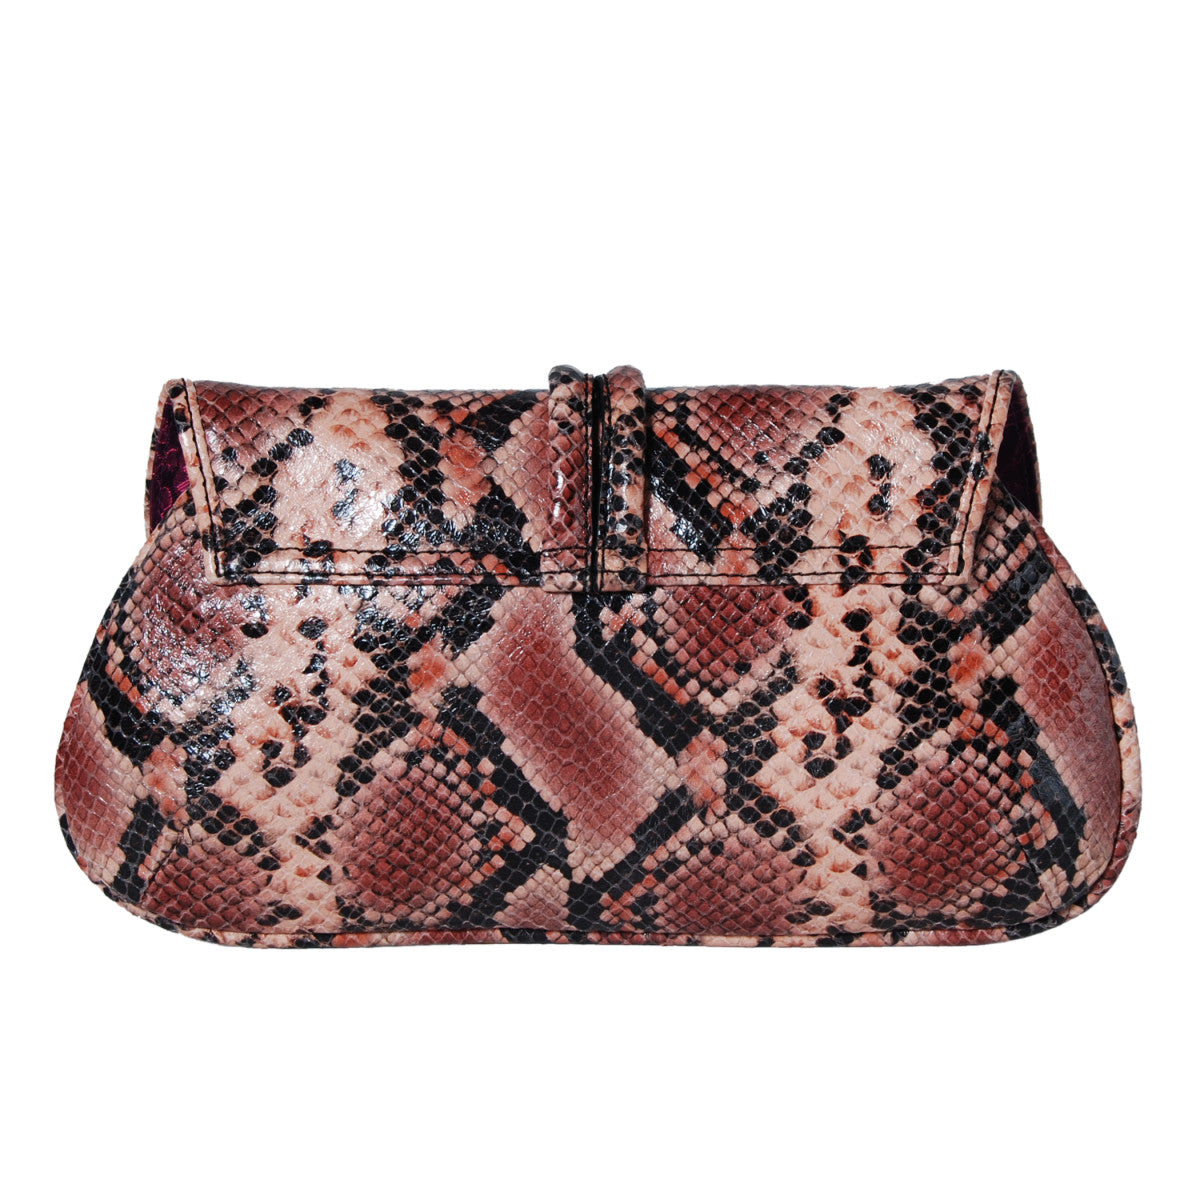 FRANCES Exotic Leather Clutch